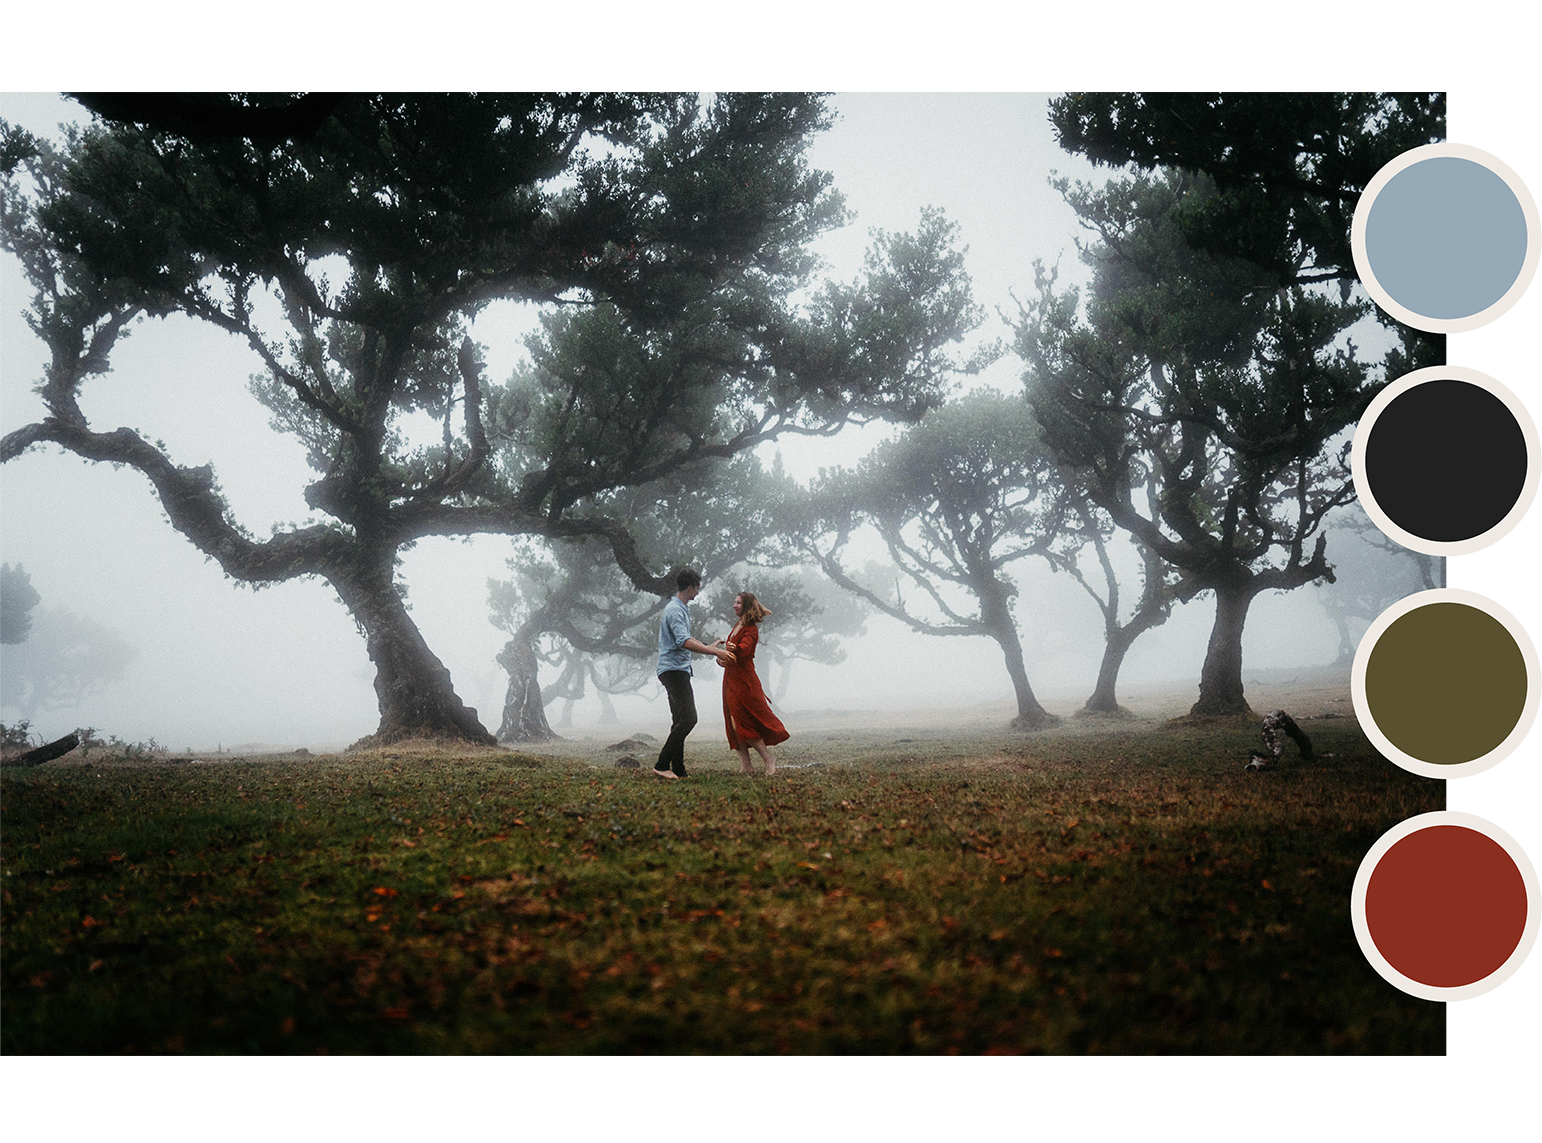 Couple is dancing in a foggy laurel forest. He is wearing dark pants and a blue button-down. She is wearing a long red dress.